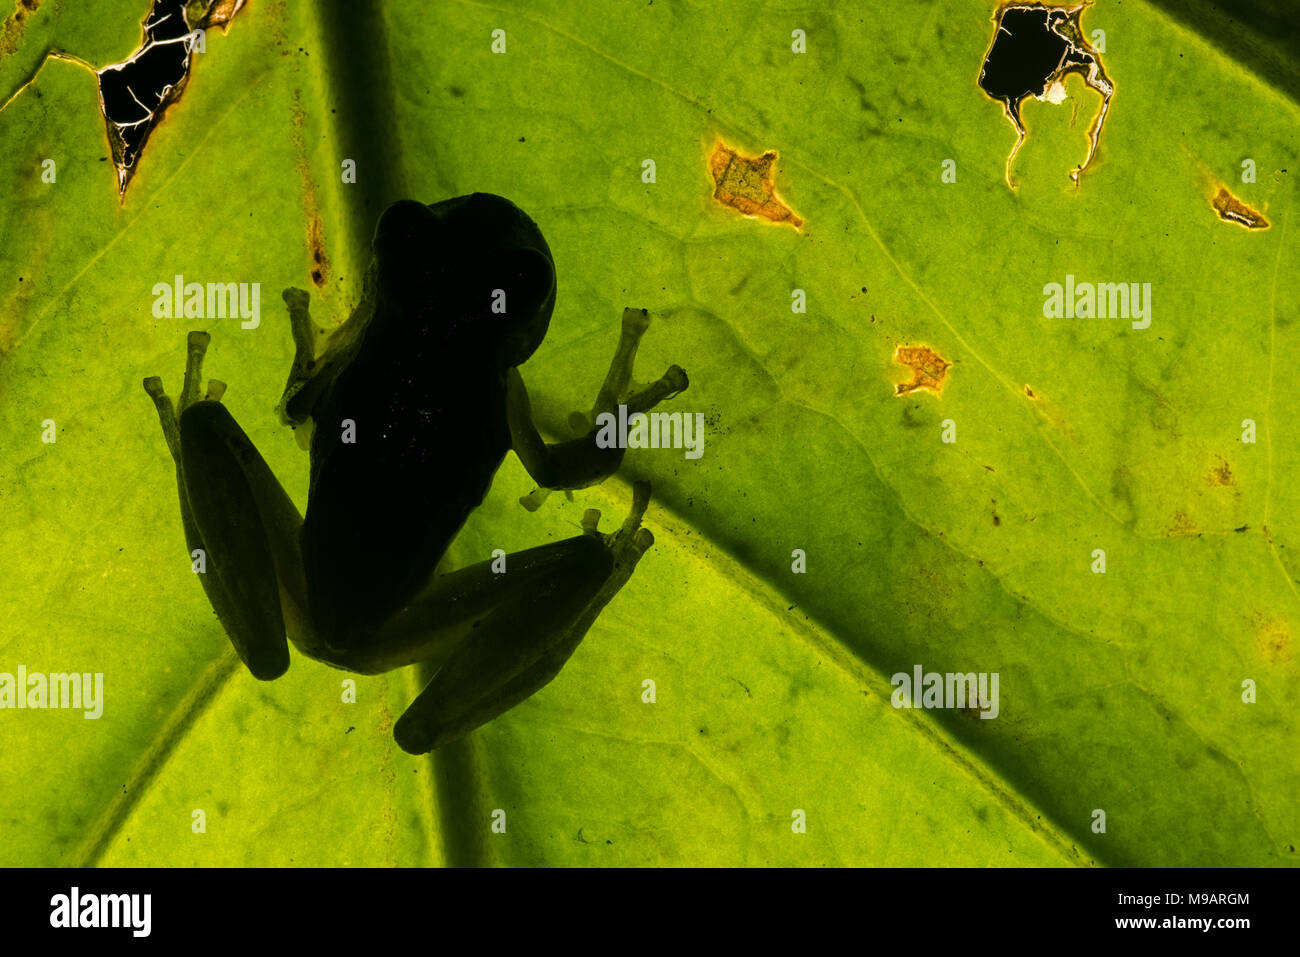 A glassfrog (Rulyrana saxiscandens) illuminated by a flash positioned behind the leaf it was sitting on. Stock Photo